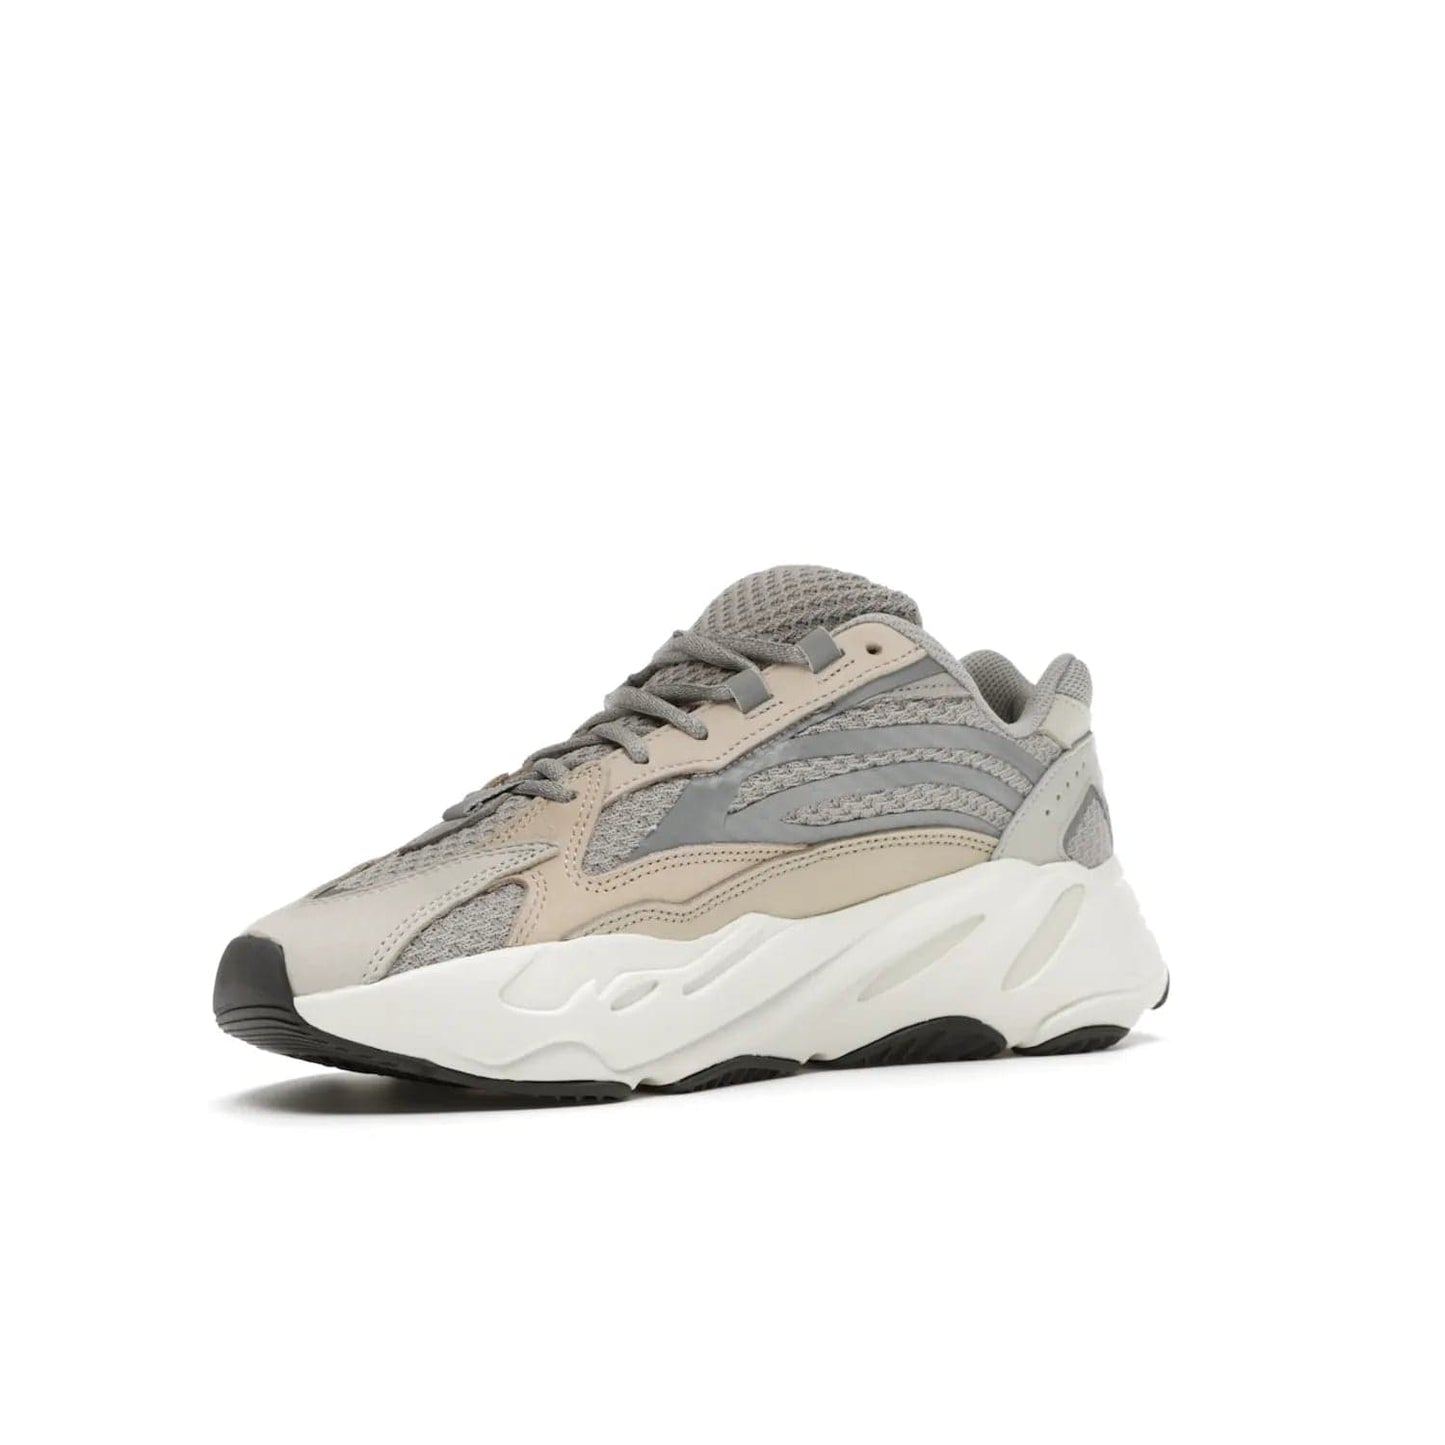 adidas Yeezy Boost 700 V2 Cream - Image 15 - Only at www.BallersClubKickz.com - Add style and luxury to your wardrobe with the adidas Yeezy 700 V2 Cream. Featuring a unique reflective upper, leather overlays, mesh underlays and the signature BOOST midsole, this silhouette is perfect for any stylish wardrobe.